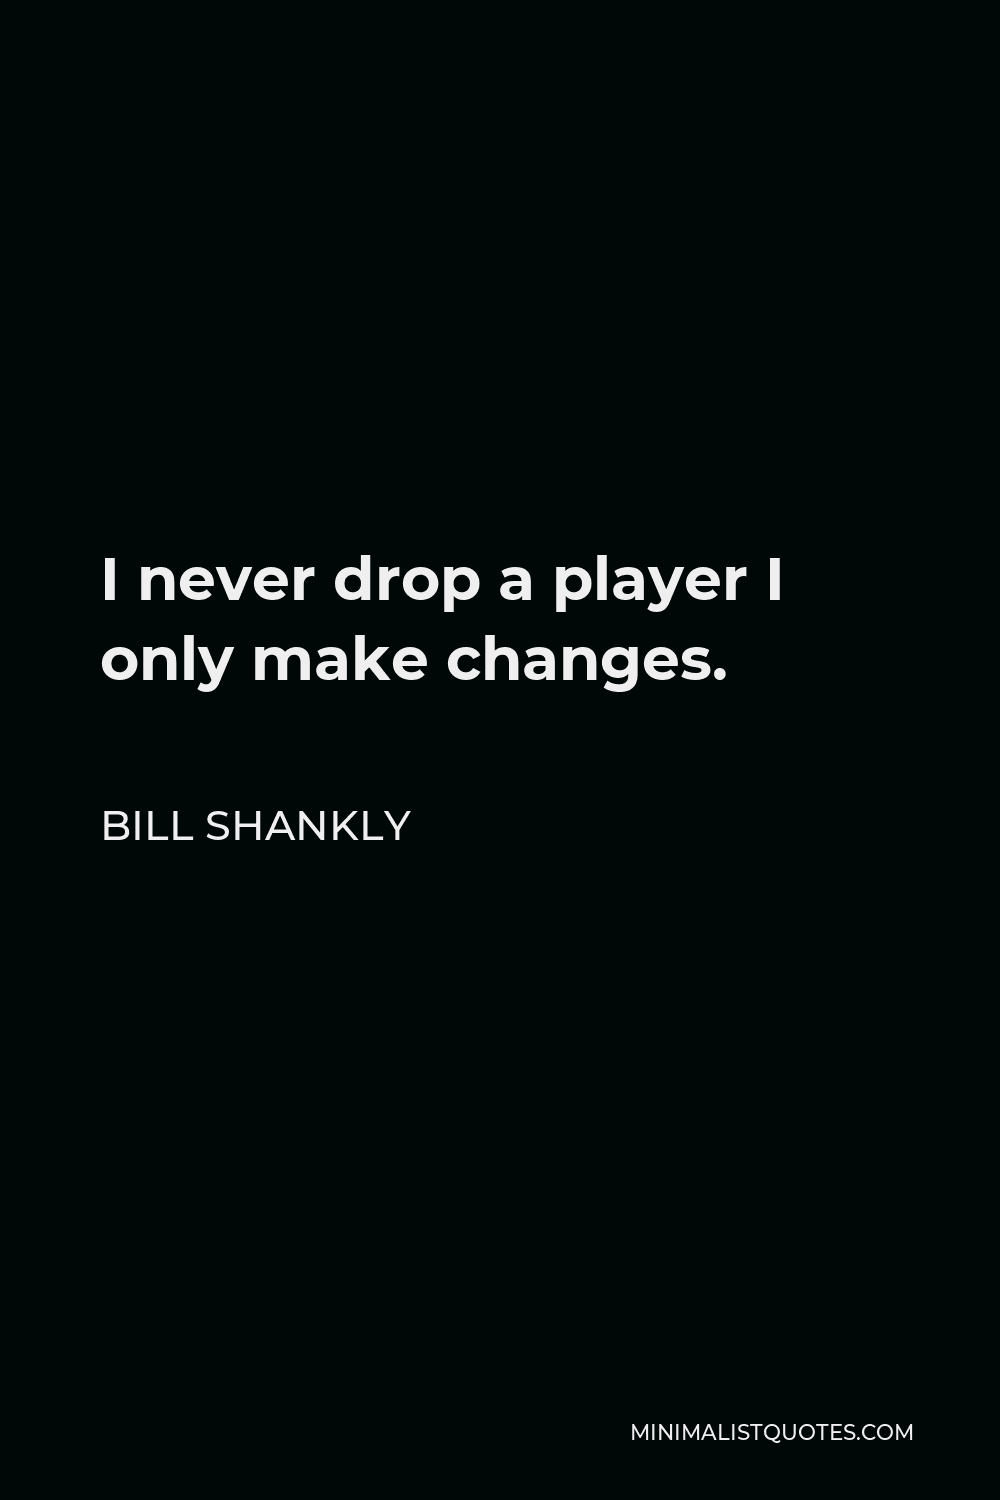 Bill Shankly Quote - I never drop a player I only make changes.